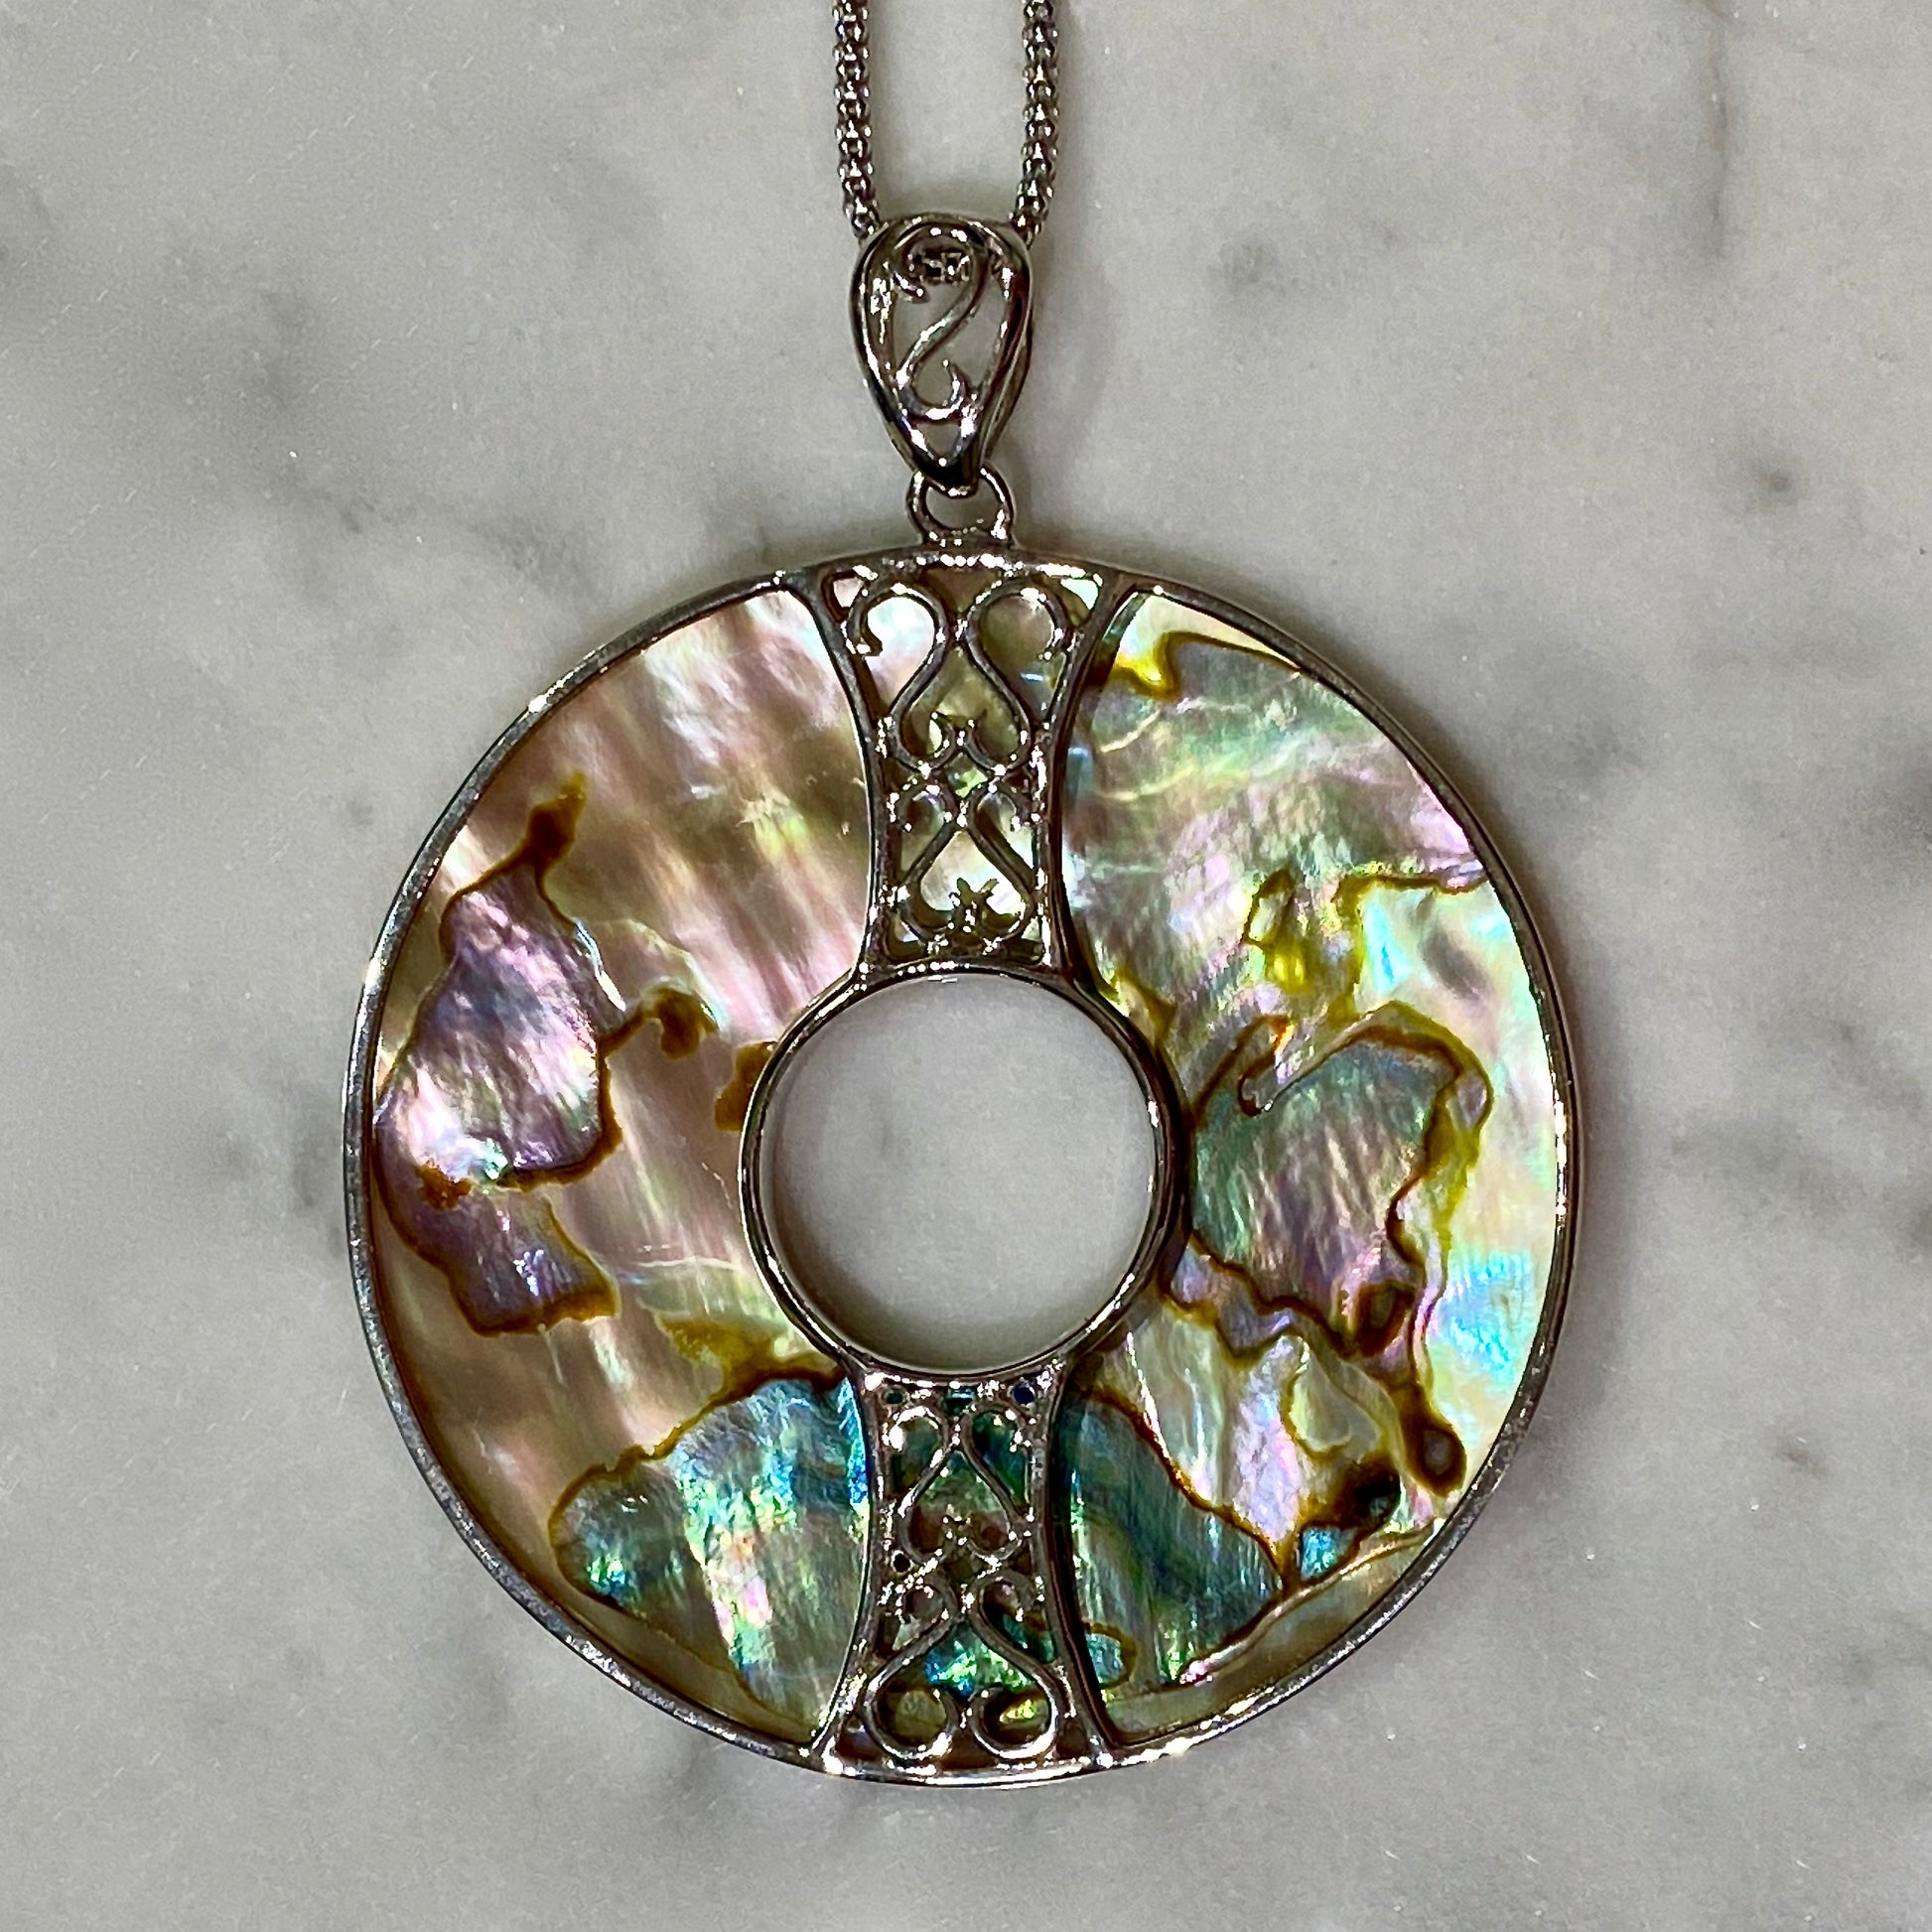 Golden Abalone Donut Pendant with Decorative Scrollwork / Arpaia Jewelry